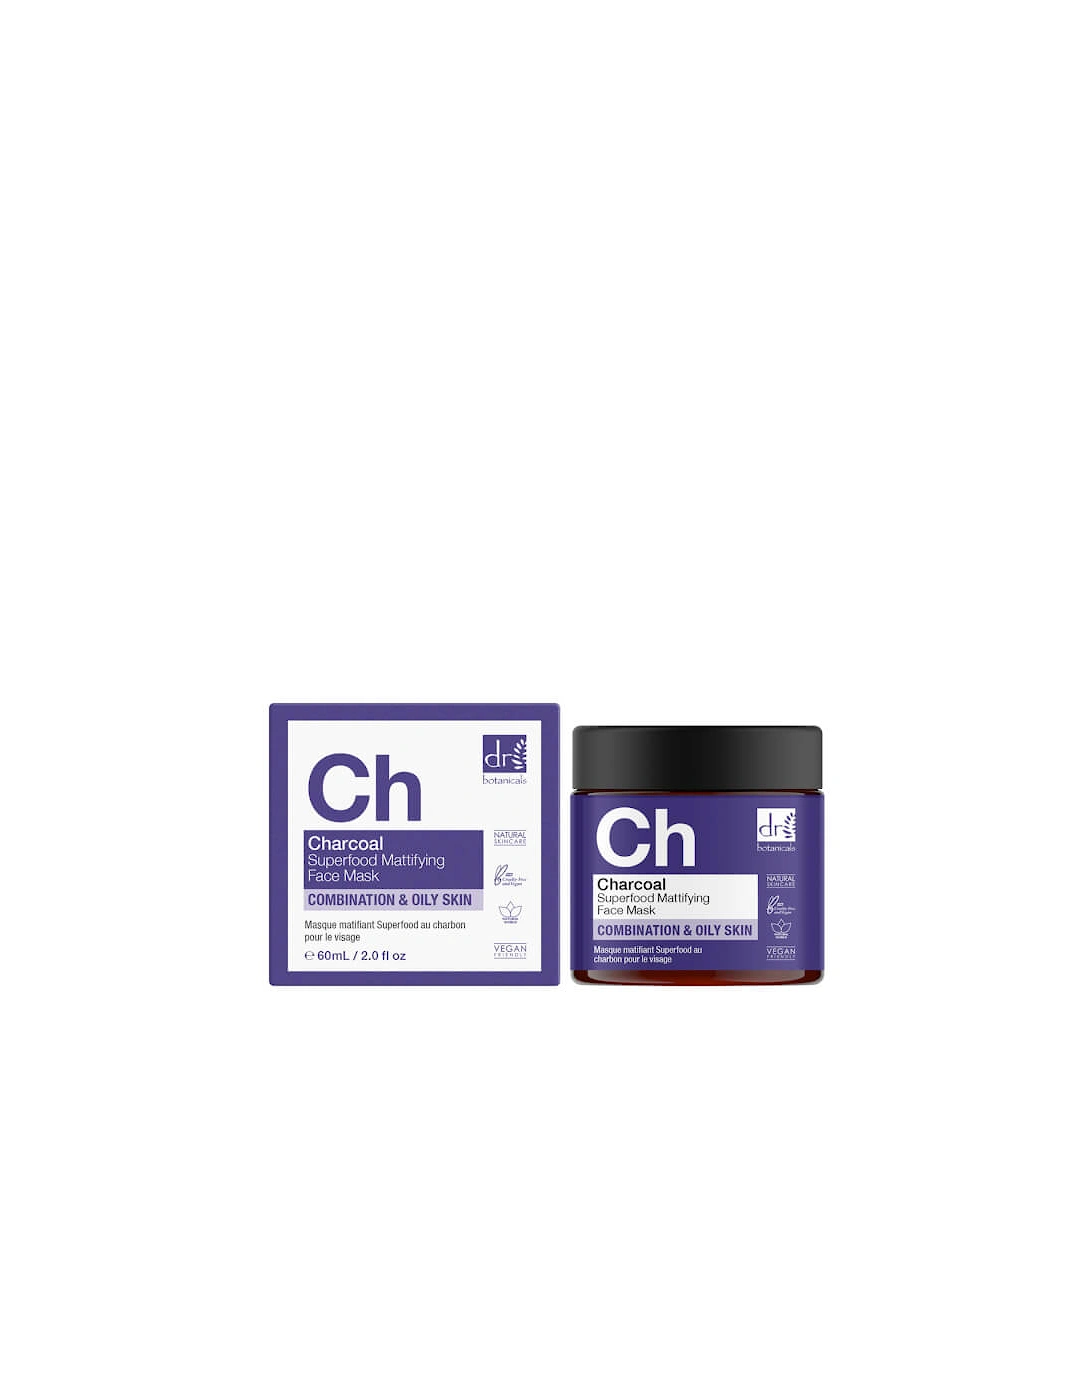 Charcoal Superfood Mattifying Face Mask 60ml, 2 of 1